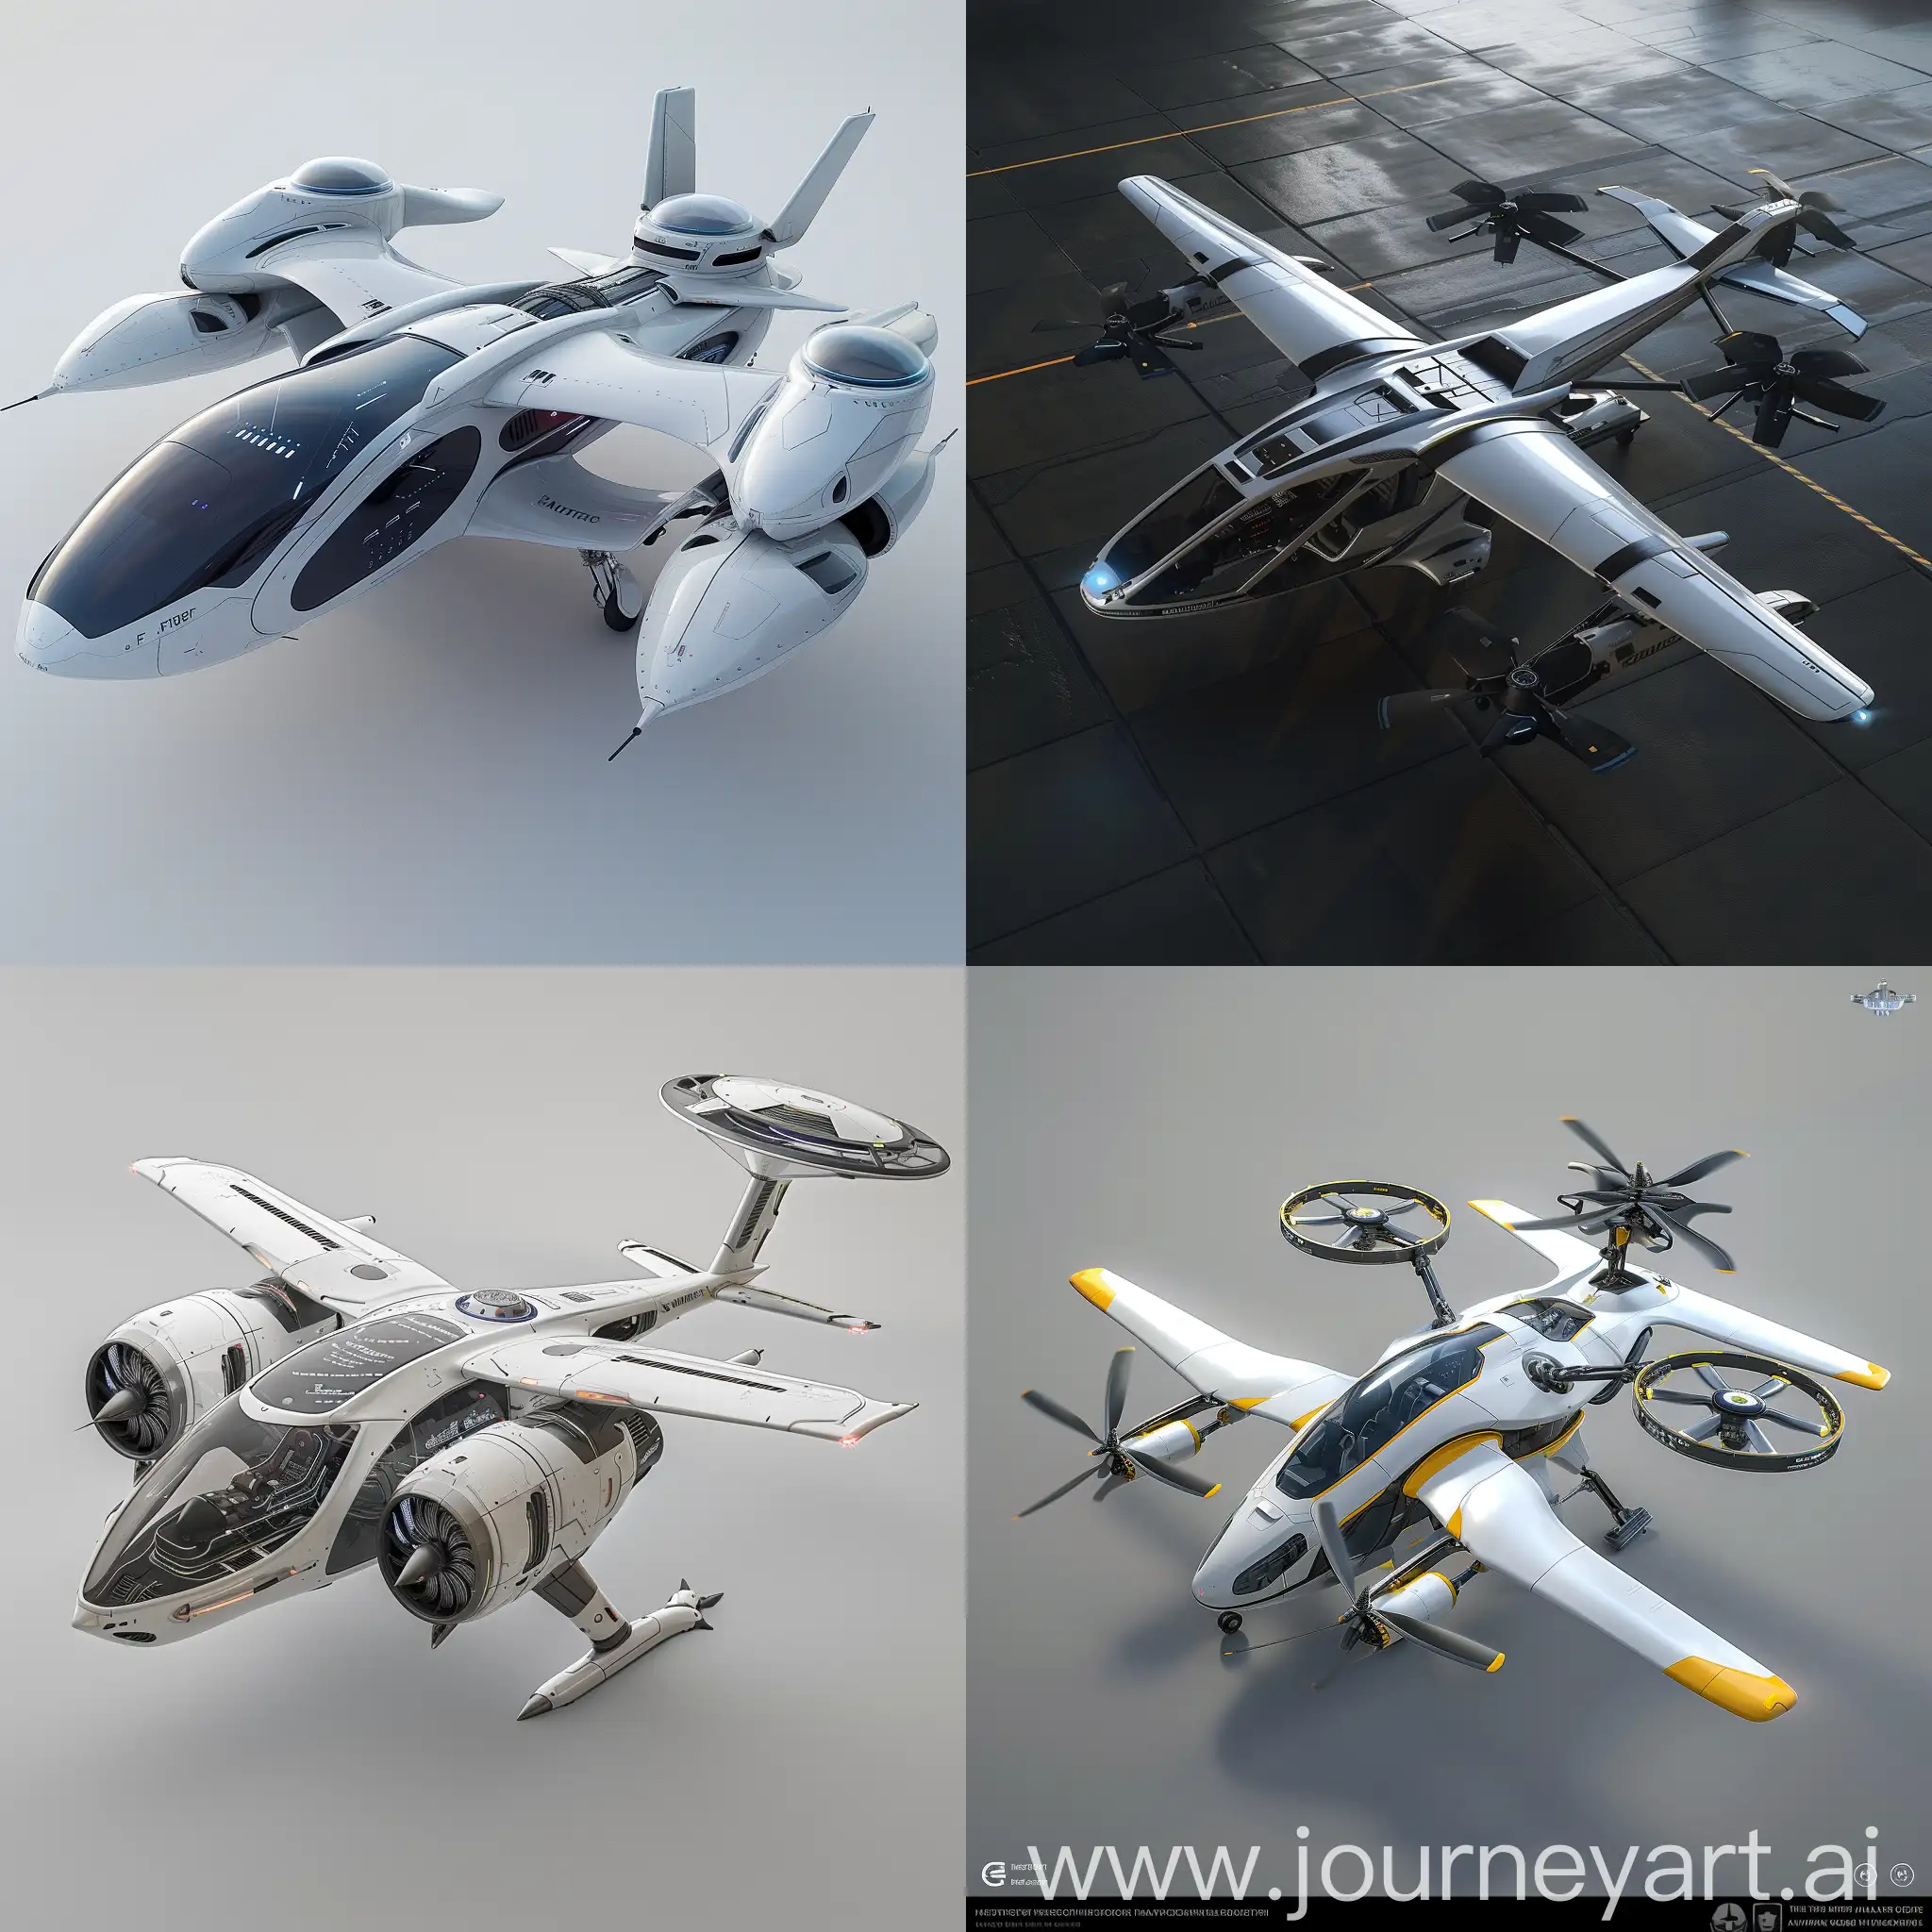 Futuristic-HybridElectric-Convertiplane-with-Advanced-Avionics-and-Stealth-Technologies